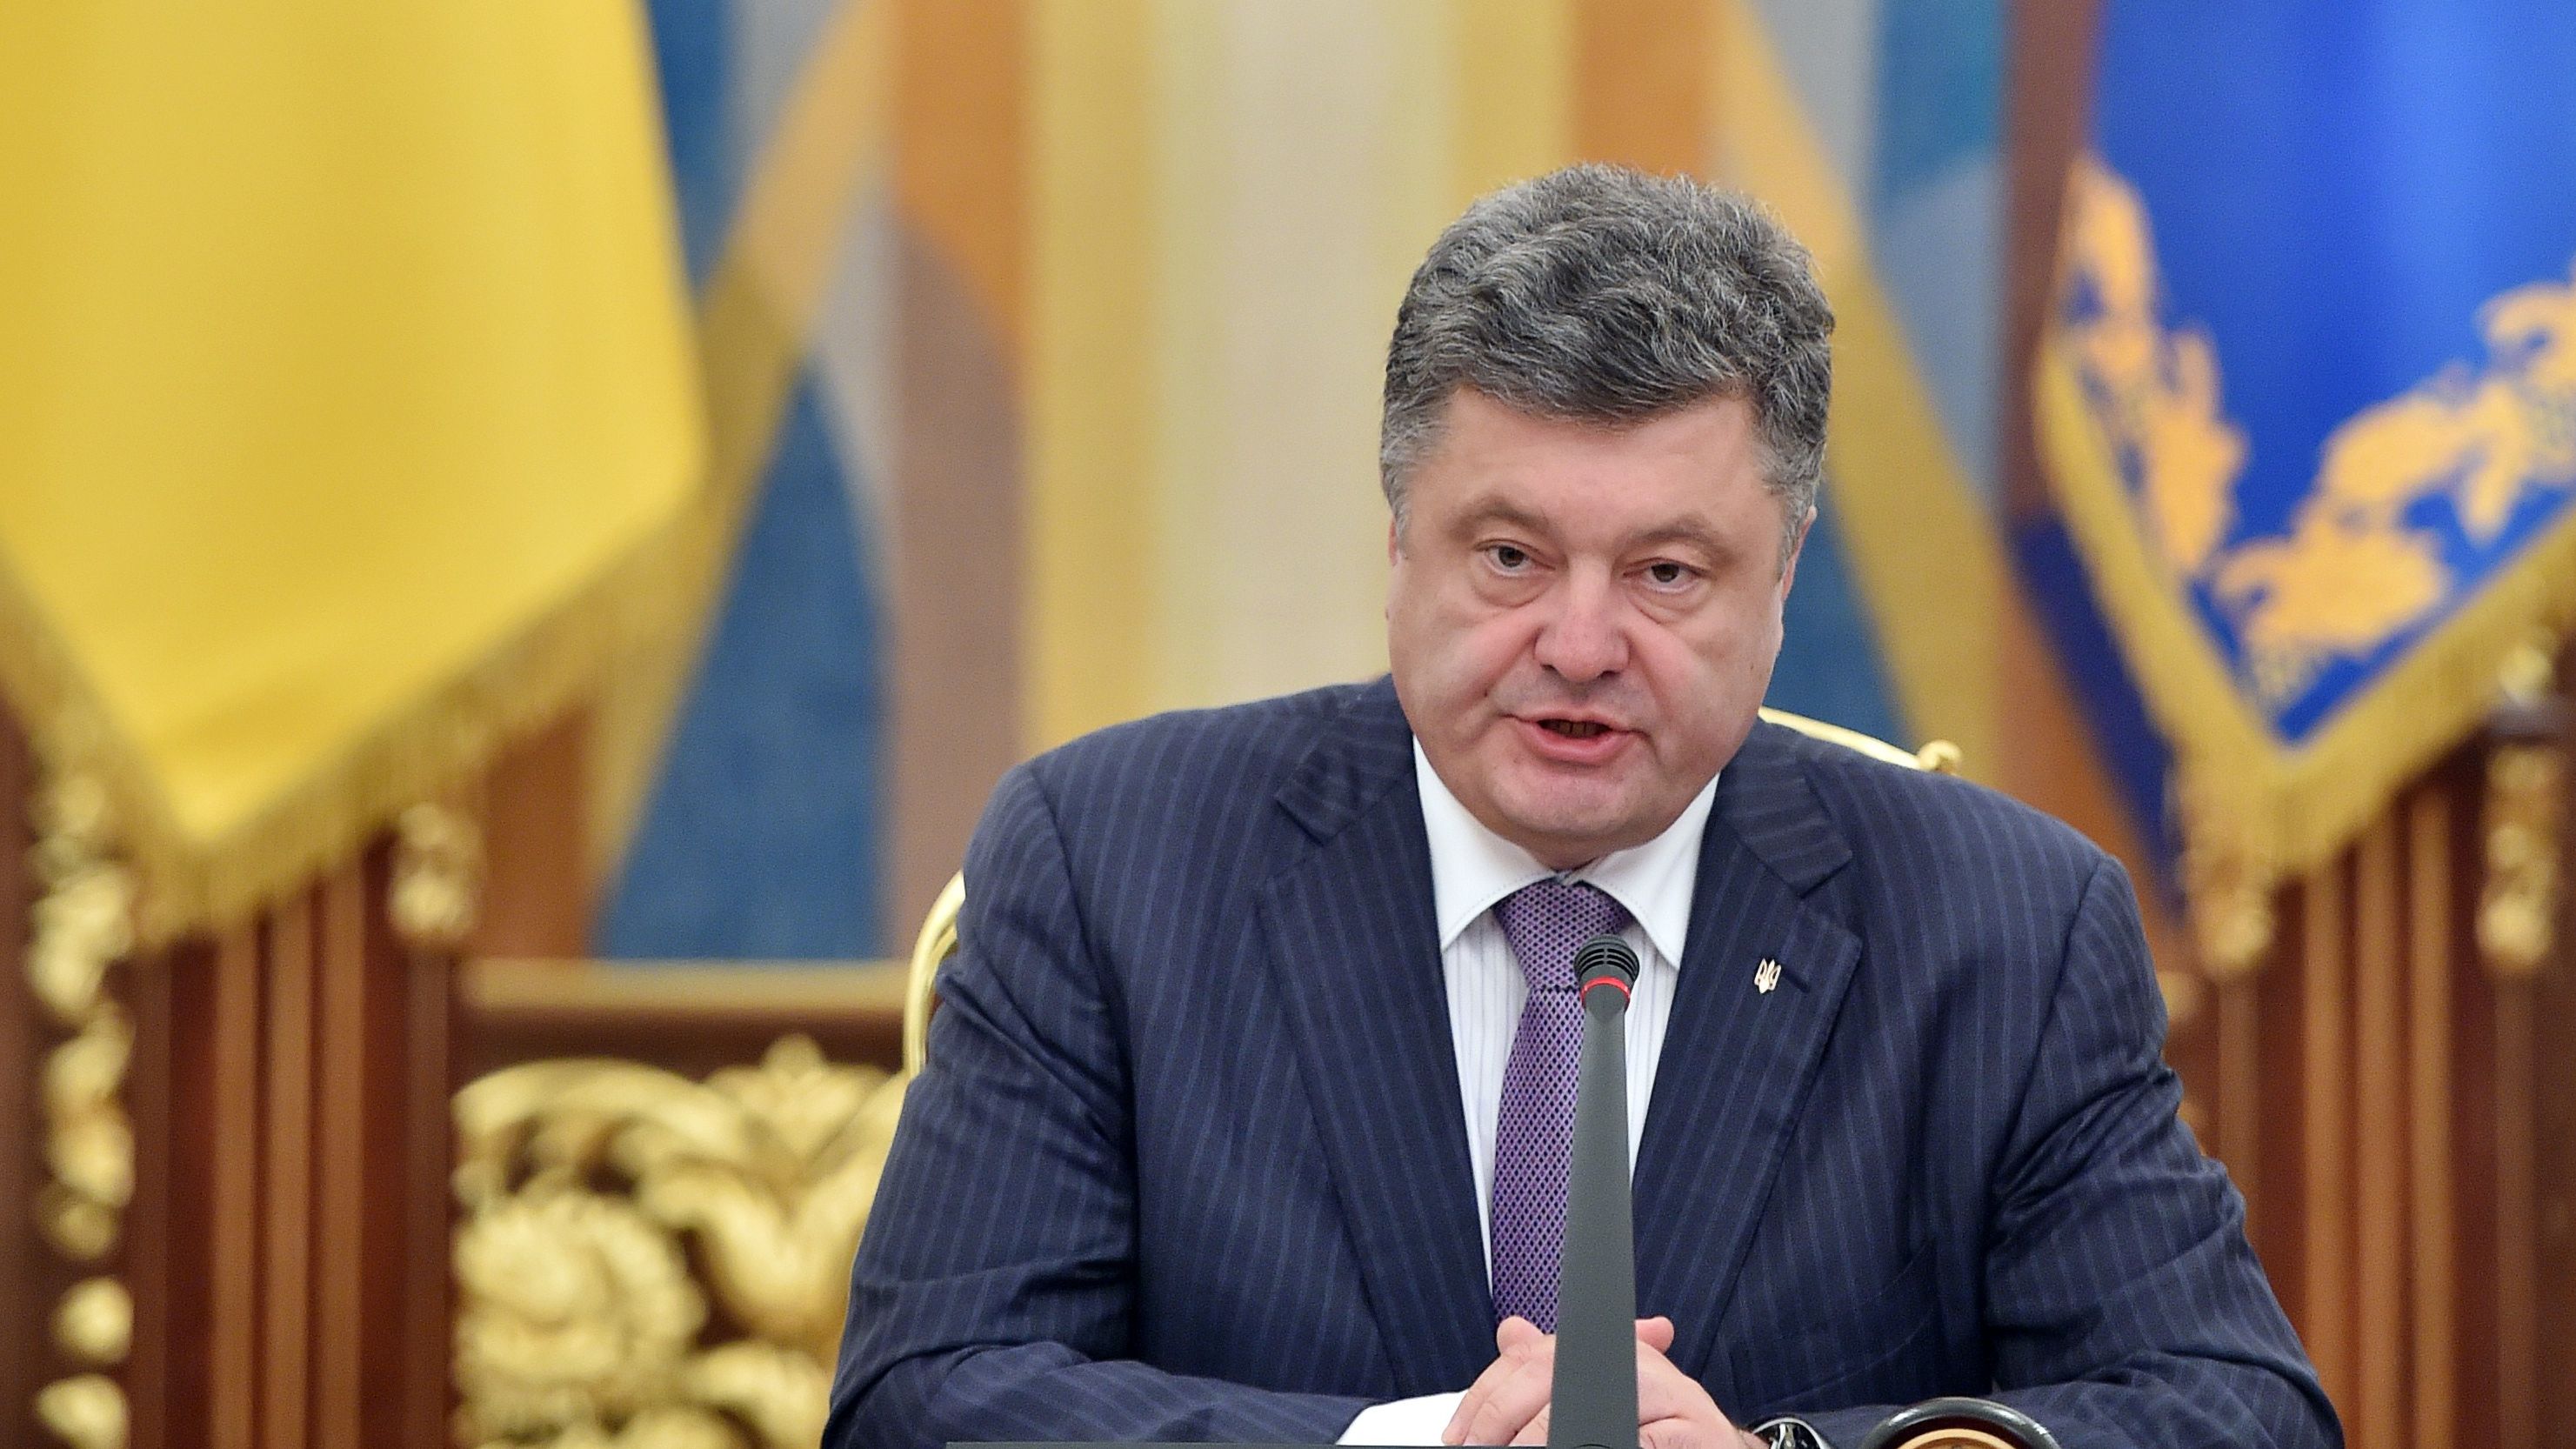 Ukrainian President Petro Poroshenko decided not to renew a cease-fire with pro-Russia separatists.